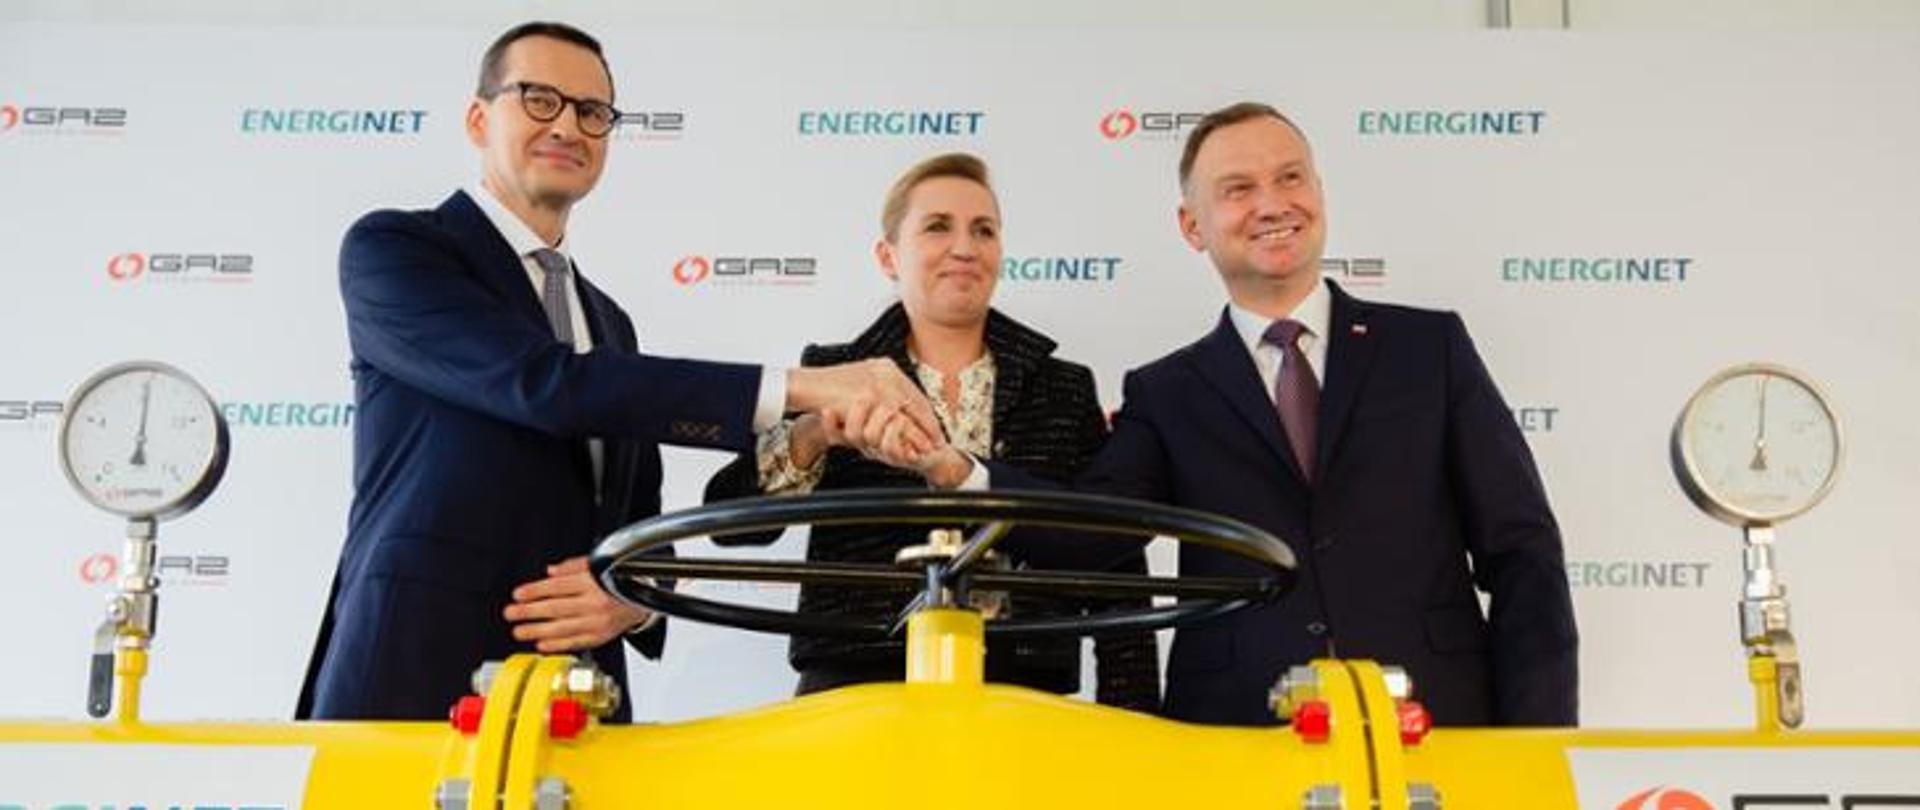 President of the Republic of Poland Andrzej Duda, Prime Minister Mateusz Morawiecki, Prime Minister of Denmark Mette Frederiksen when opening the Baltic Pipe